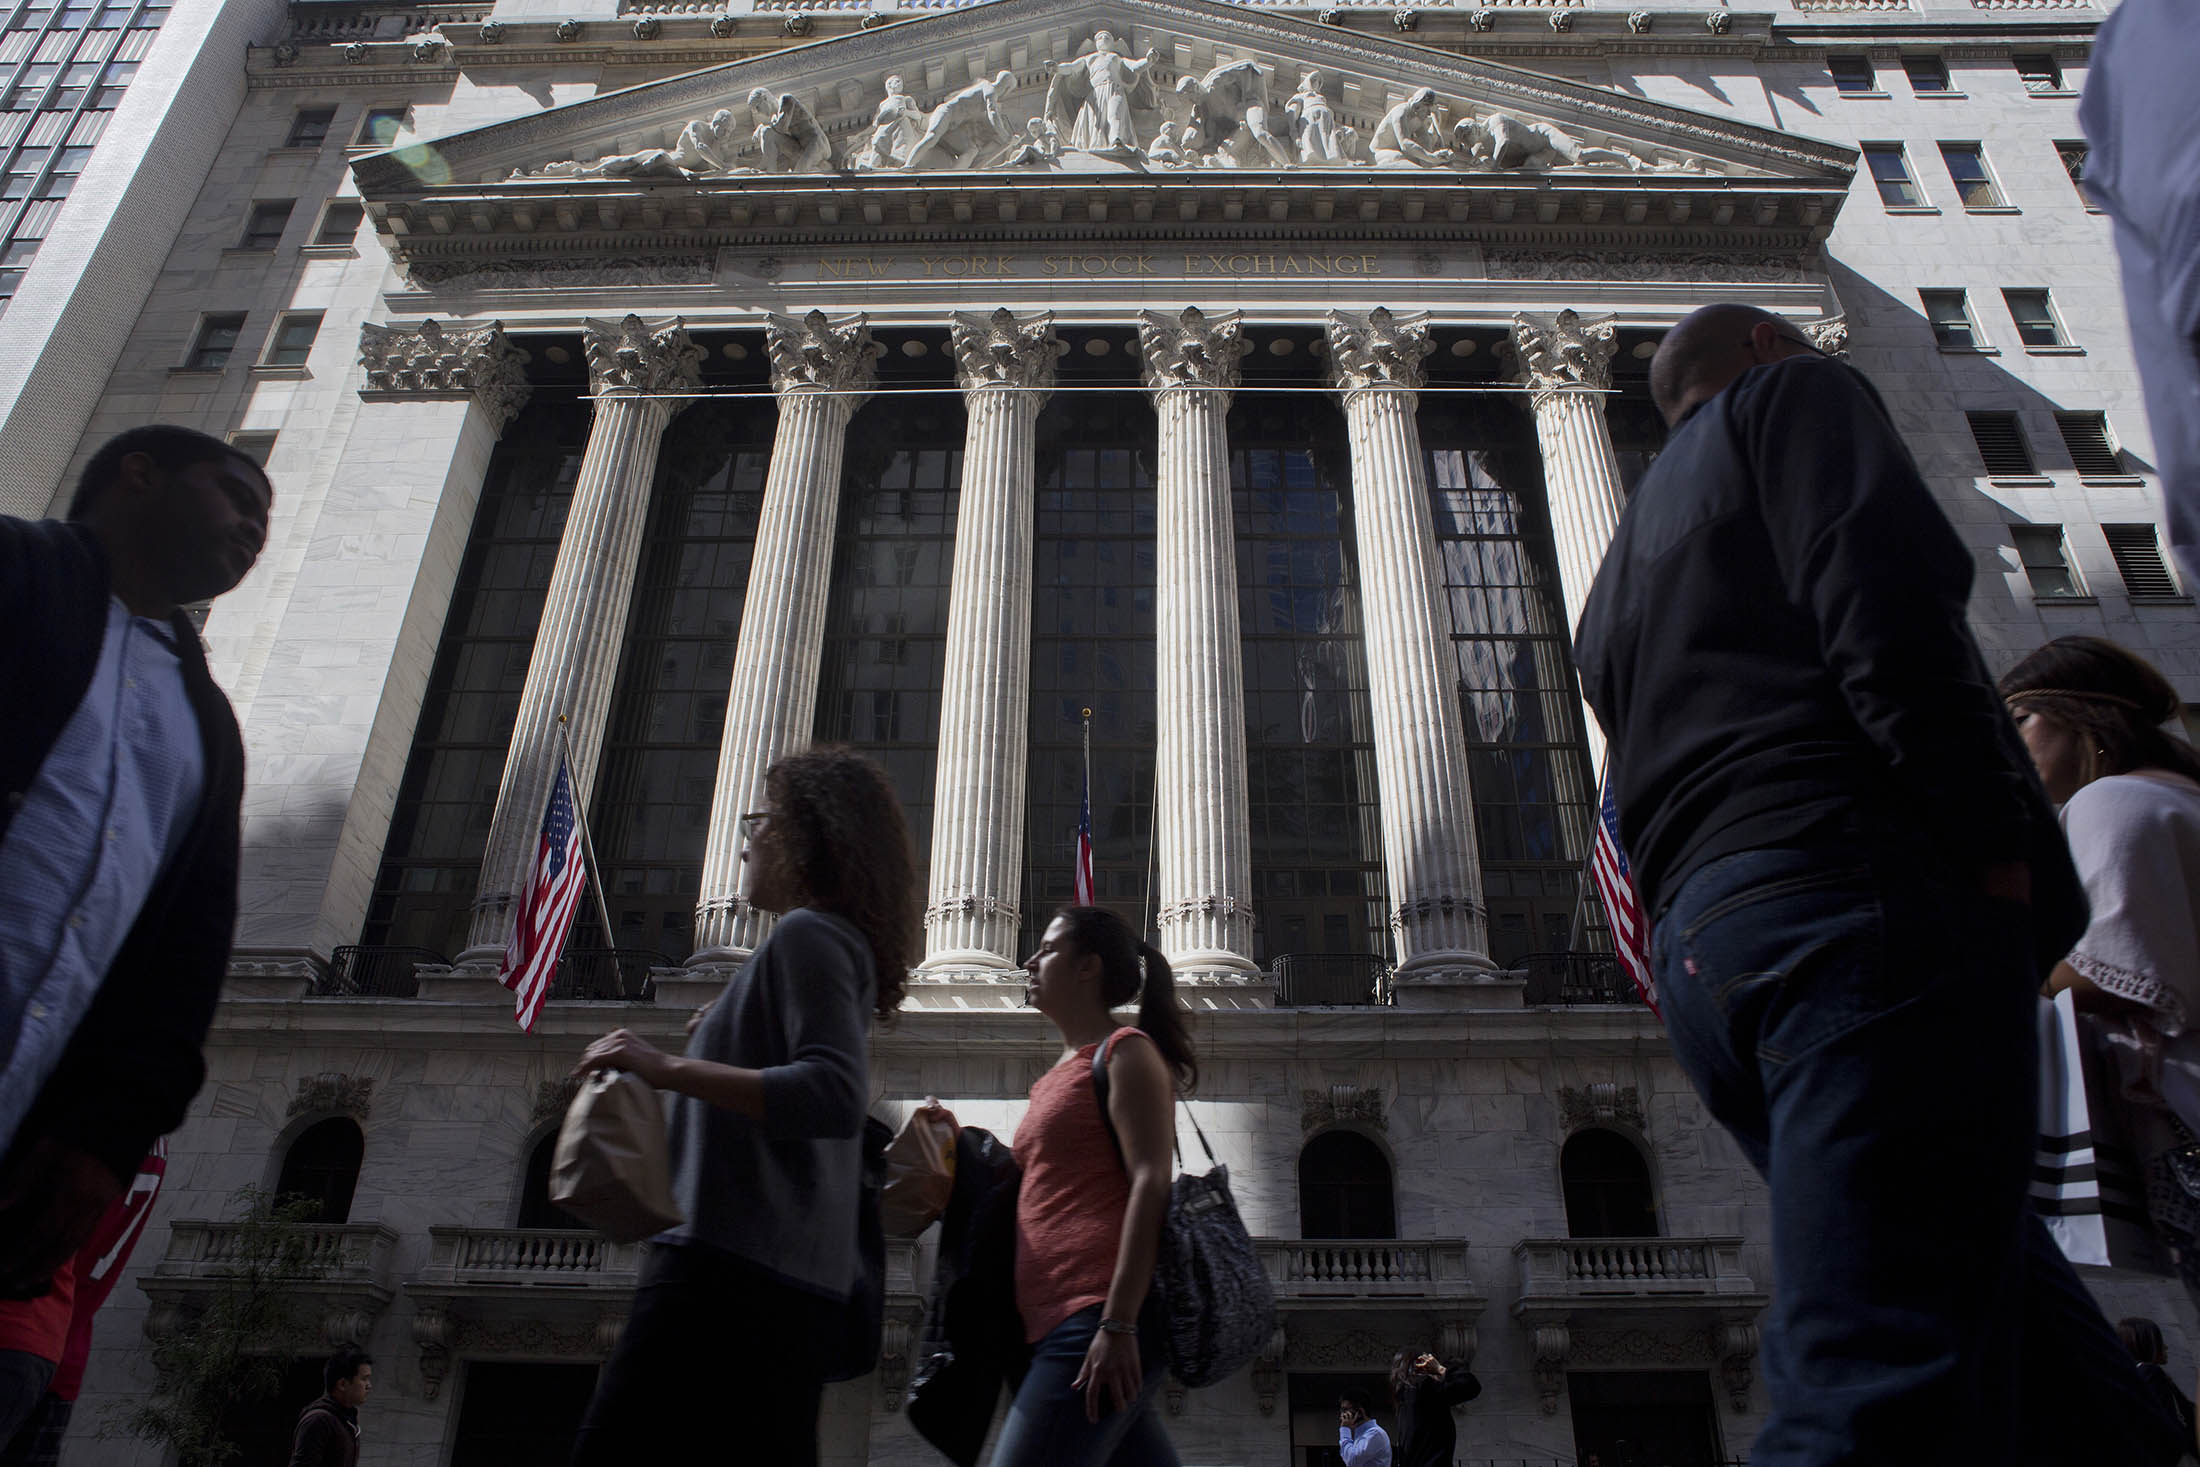 Pedestrians pass by the New York Stock Exchange (NYSE) in New York, U.S., on Friday, Sept. 26, 2014. The S&amp;P 500 finished the quarter below its average price for the past 50 days after dropping under that level for the first time since August on Sept. 25.
